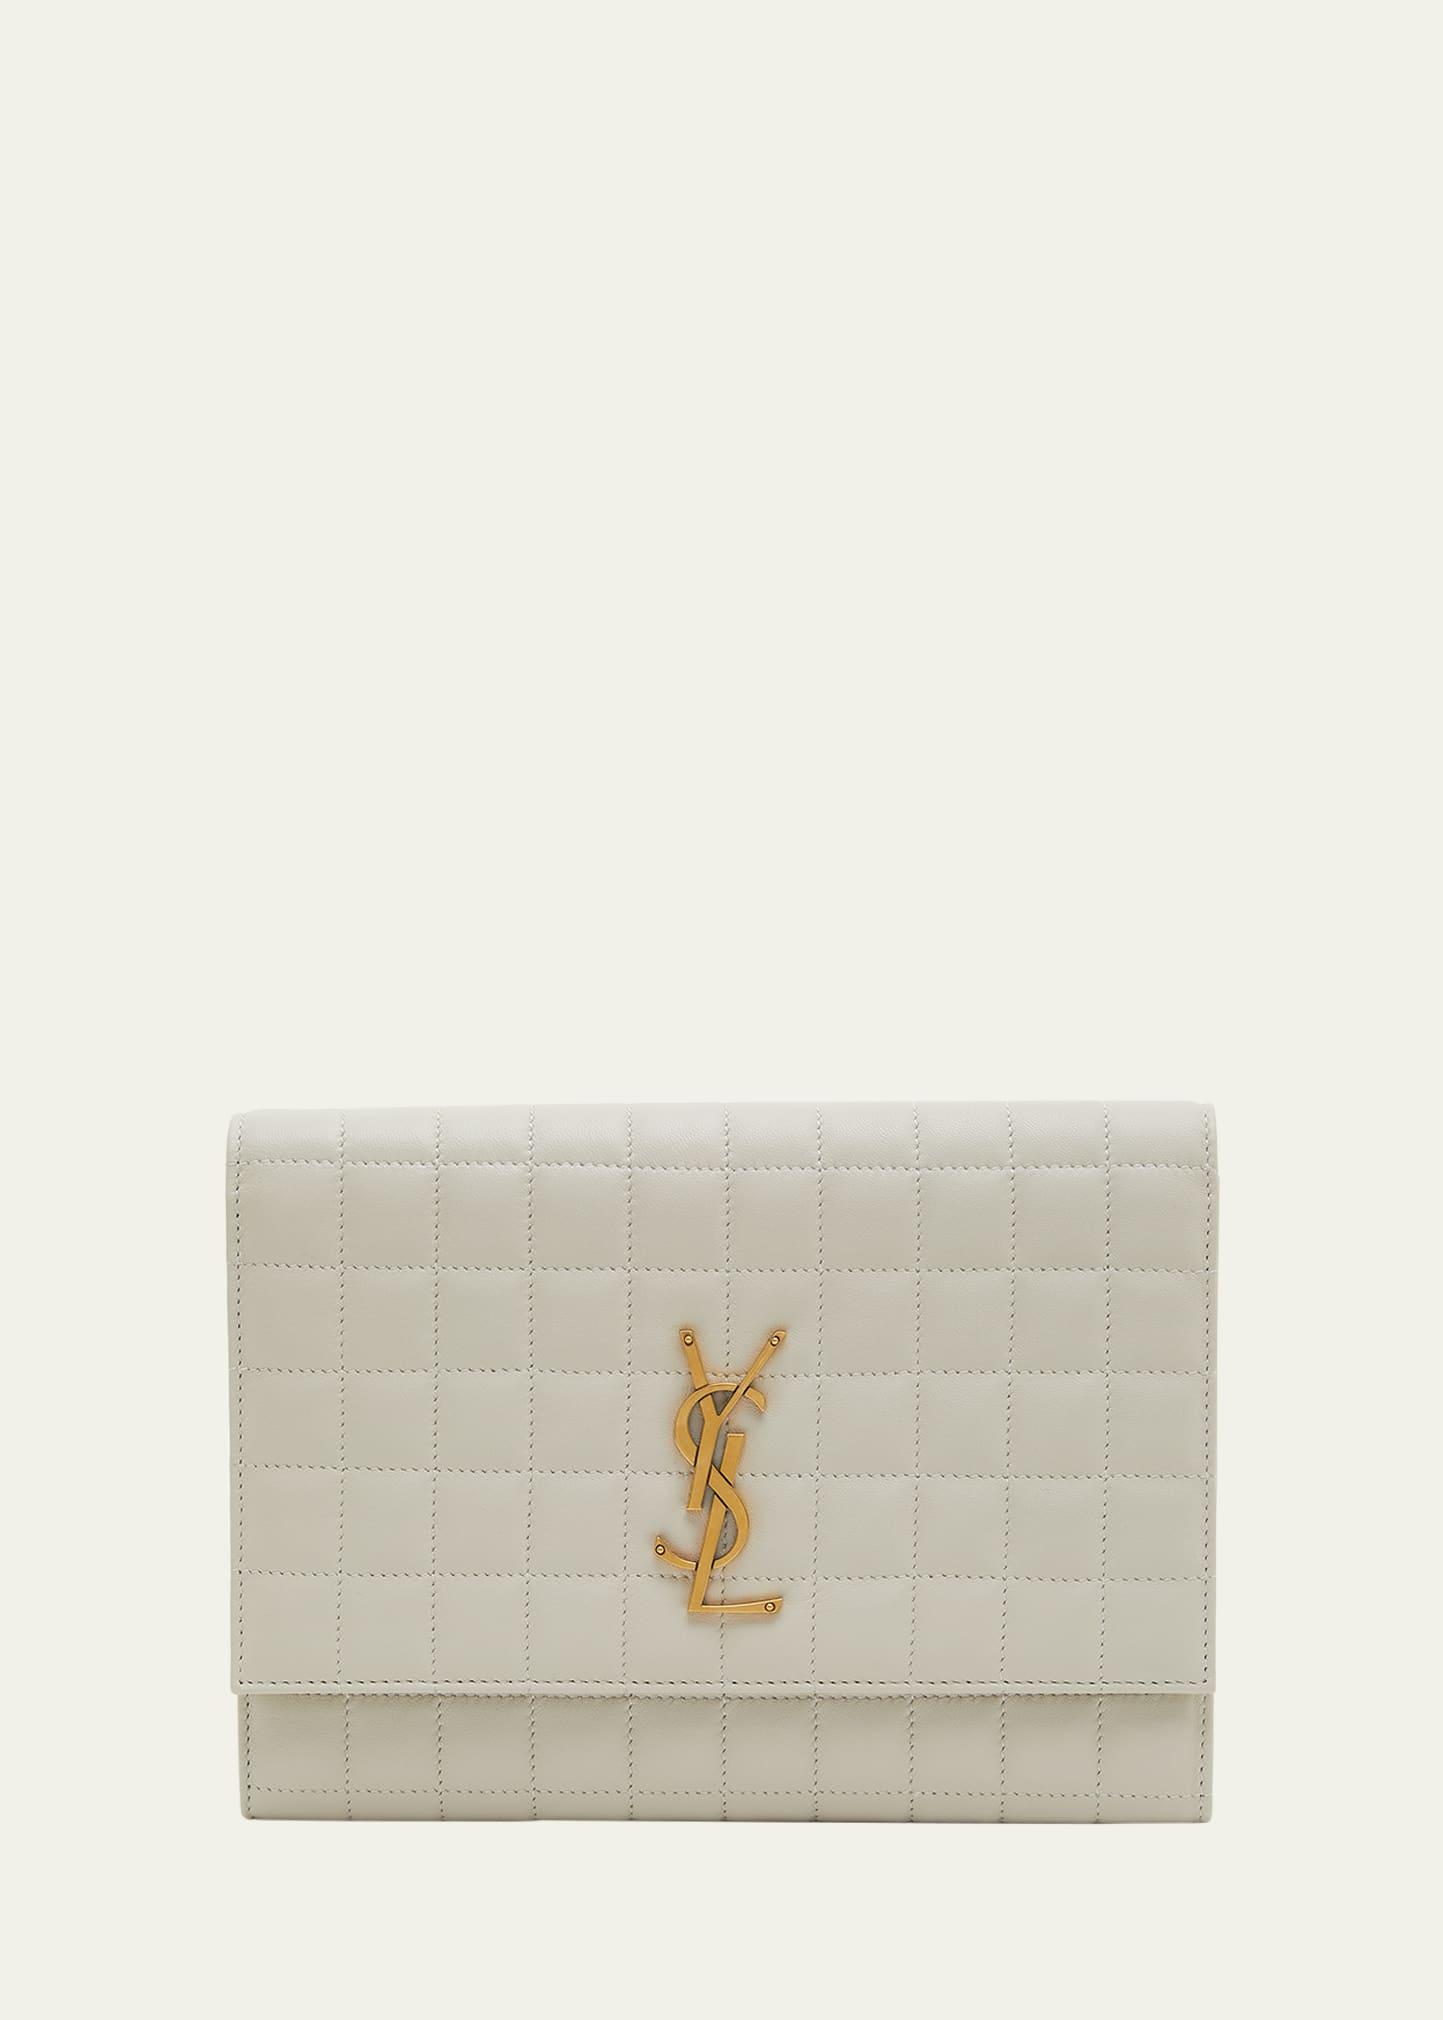 SAINT LAURENT Monogramme quilted textured-leather pouch